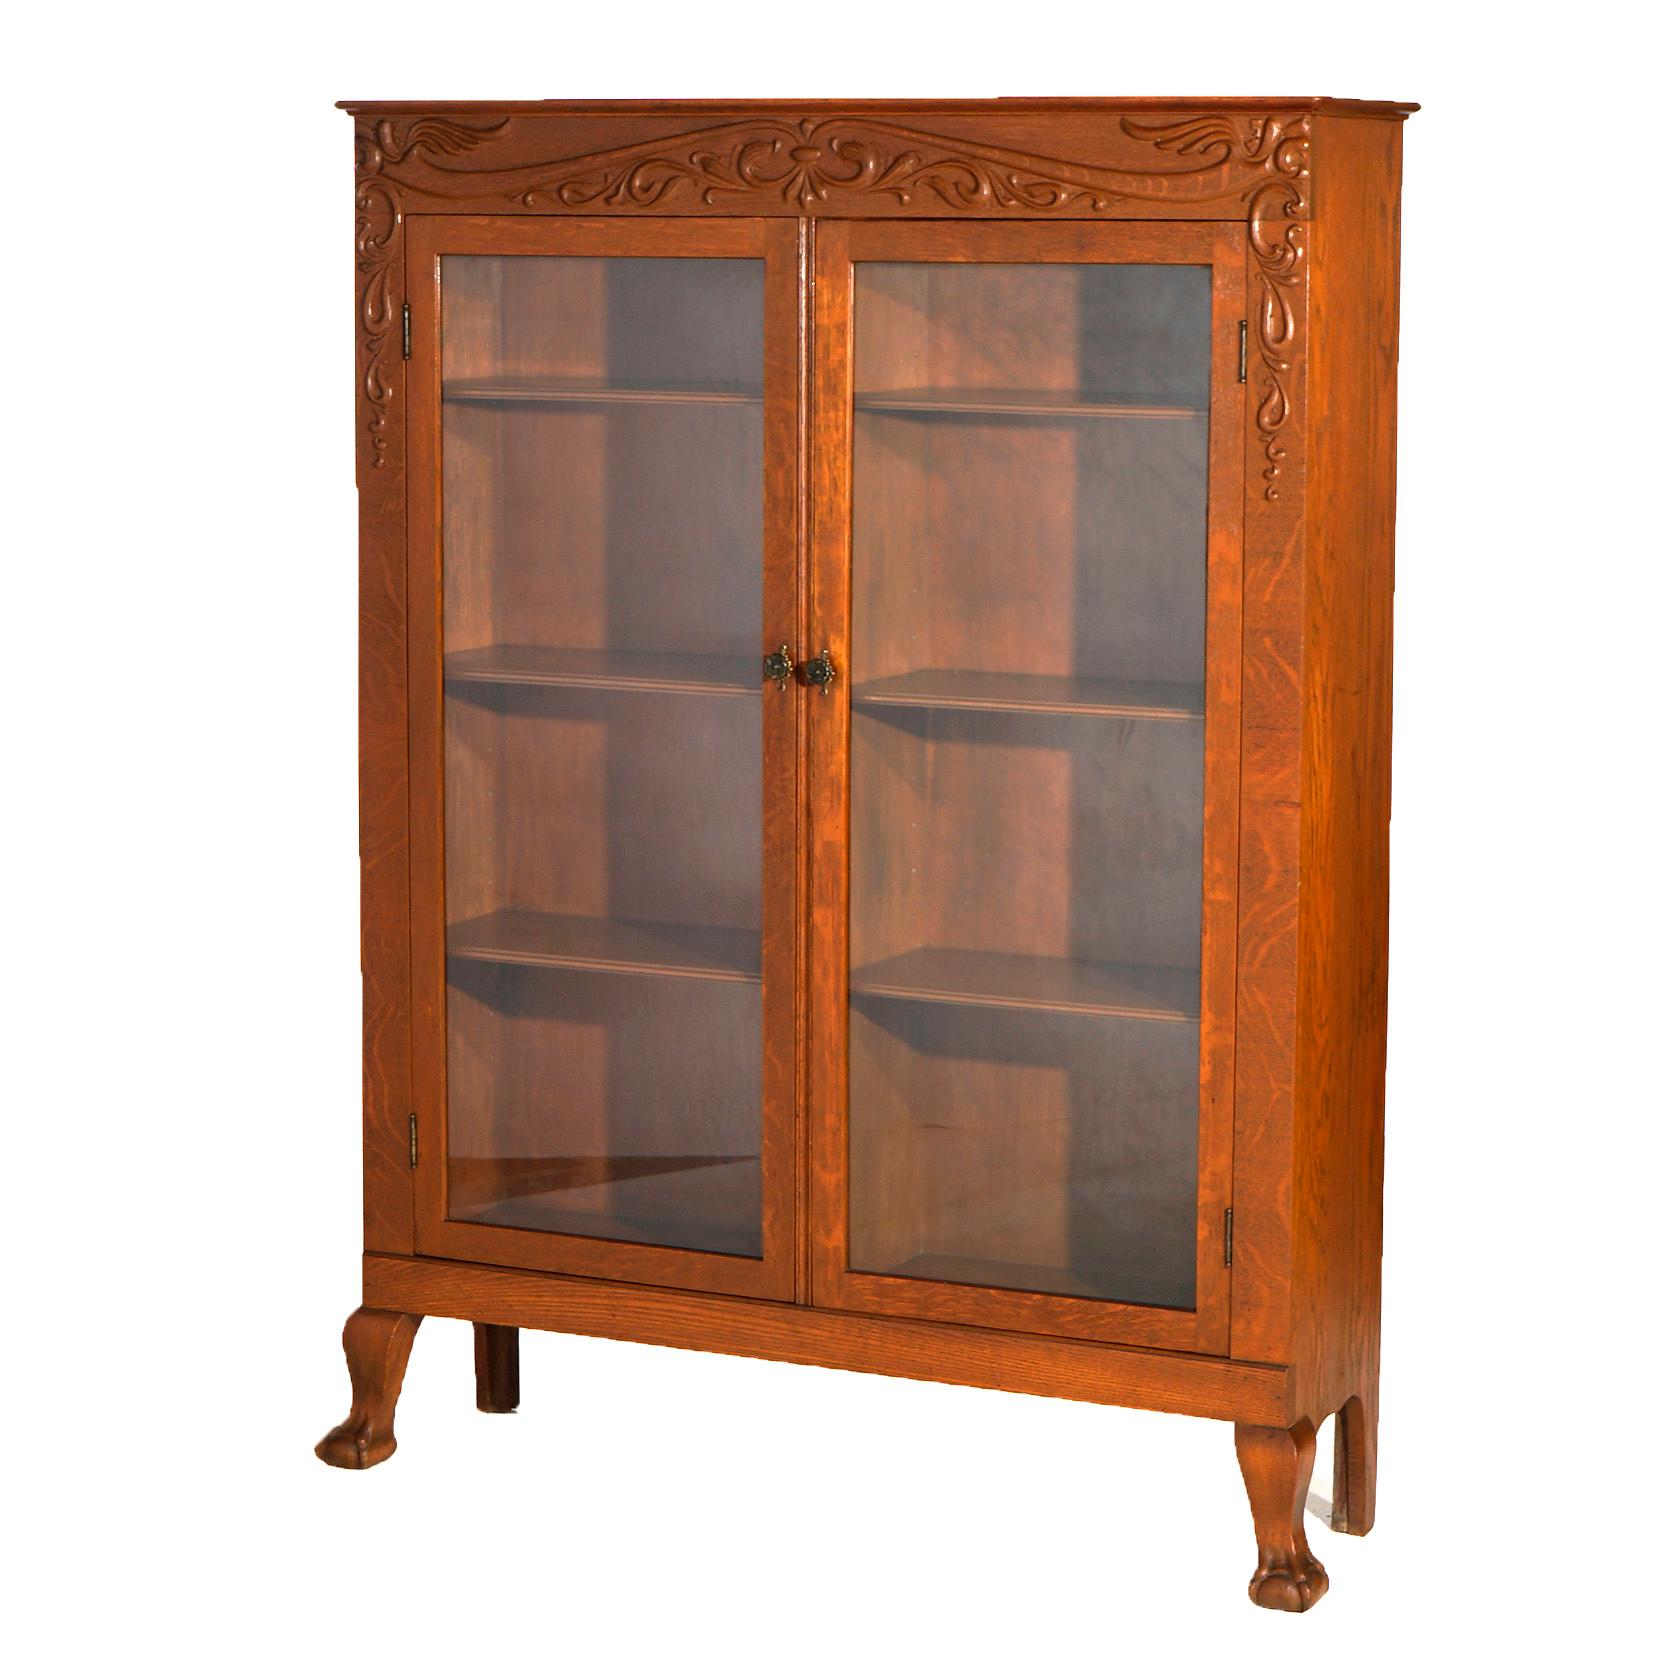 An antique bookcase in the manner of RJ Horner offers quarter sawn oak construction with frieze having scroll and foliate decoration over case having double glass doors opening to dived shelved interior, raised on cabriole legs terminating in claw